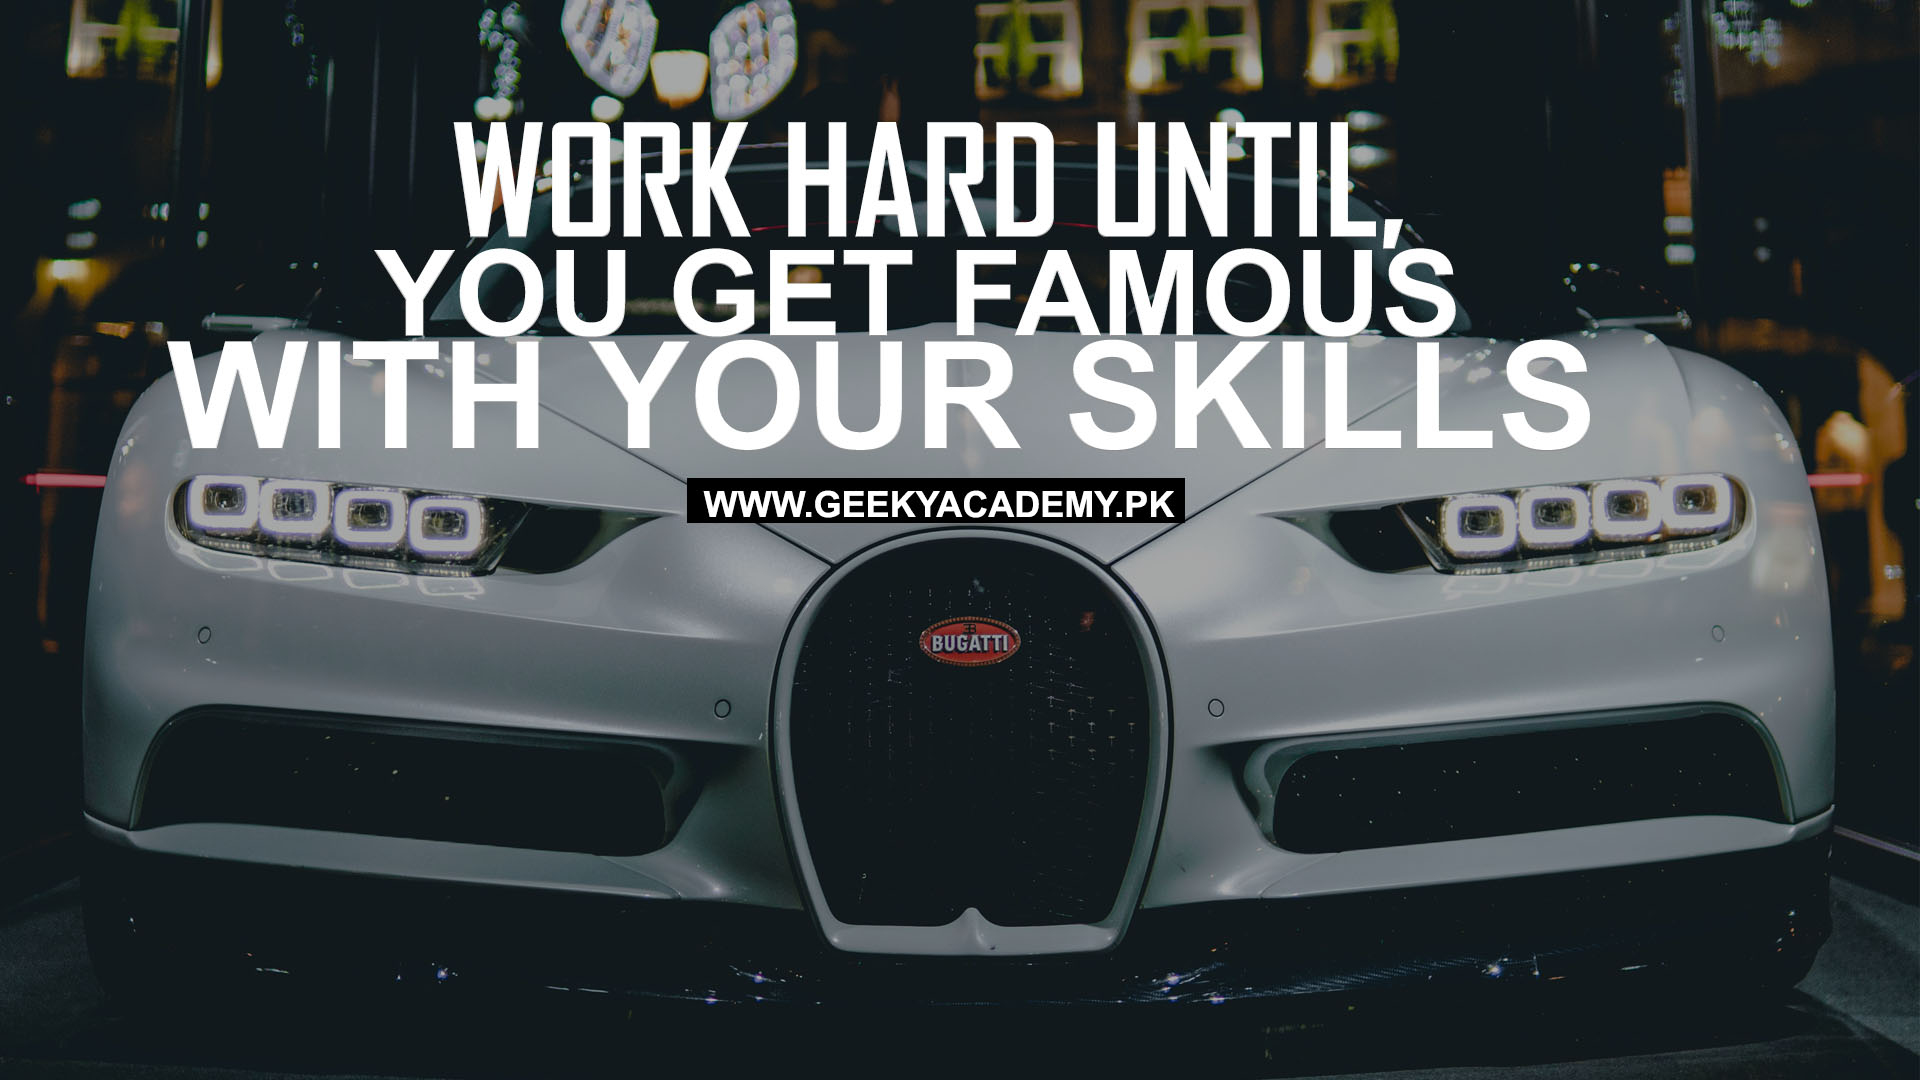 motivational quotes - Work Hard Until You Get Famous With Your Skills